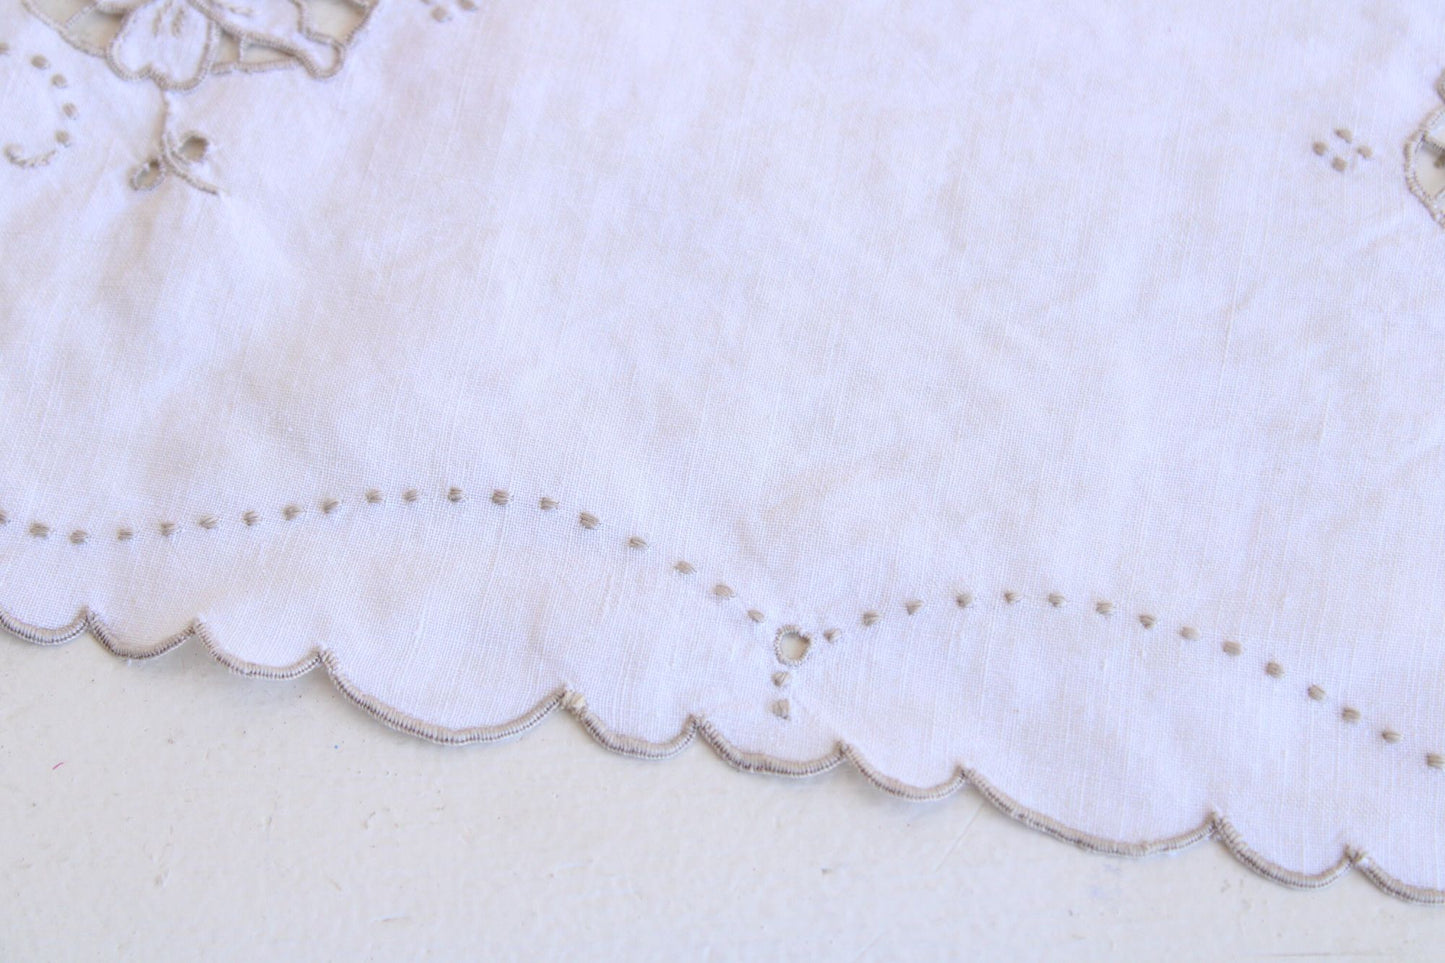 Vintage 1930s Linen Placemat or Doily, Beige With Embroidery